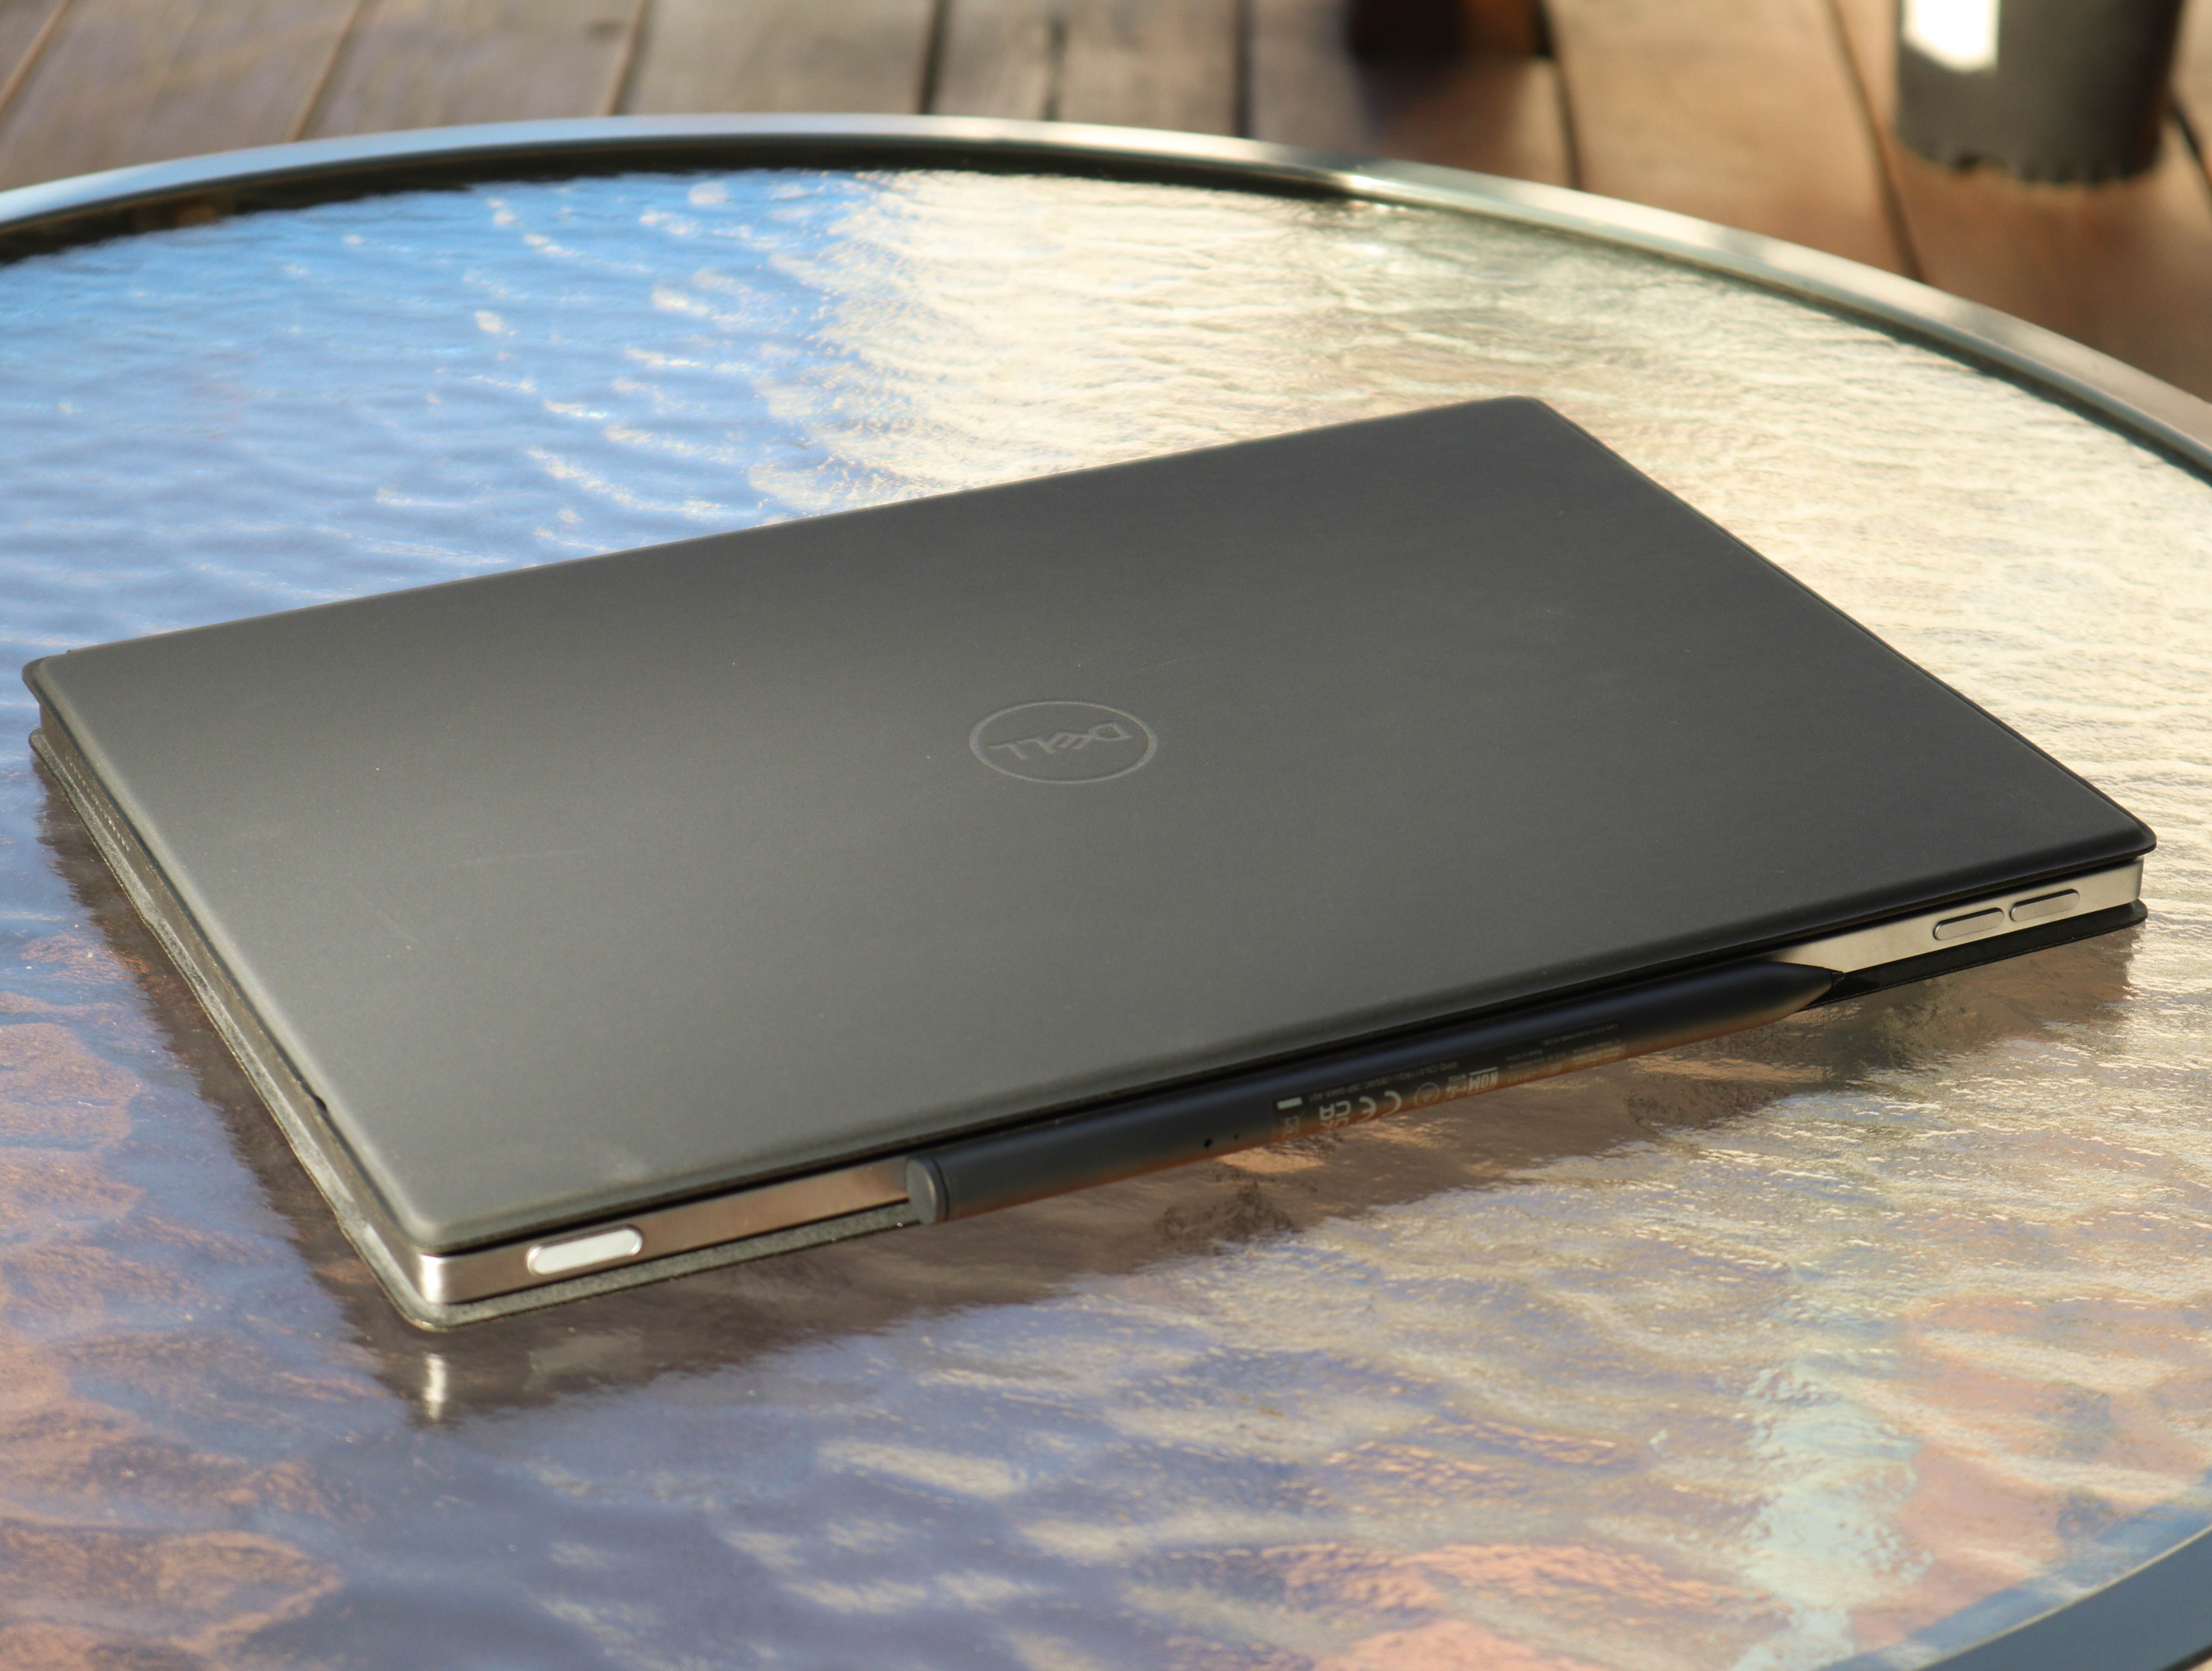 Dell XPS 13 2-in-1 Review: A Surface-like Slate for Less - CNET